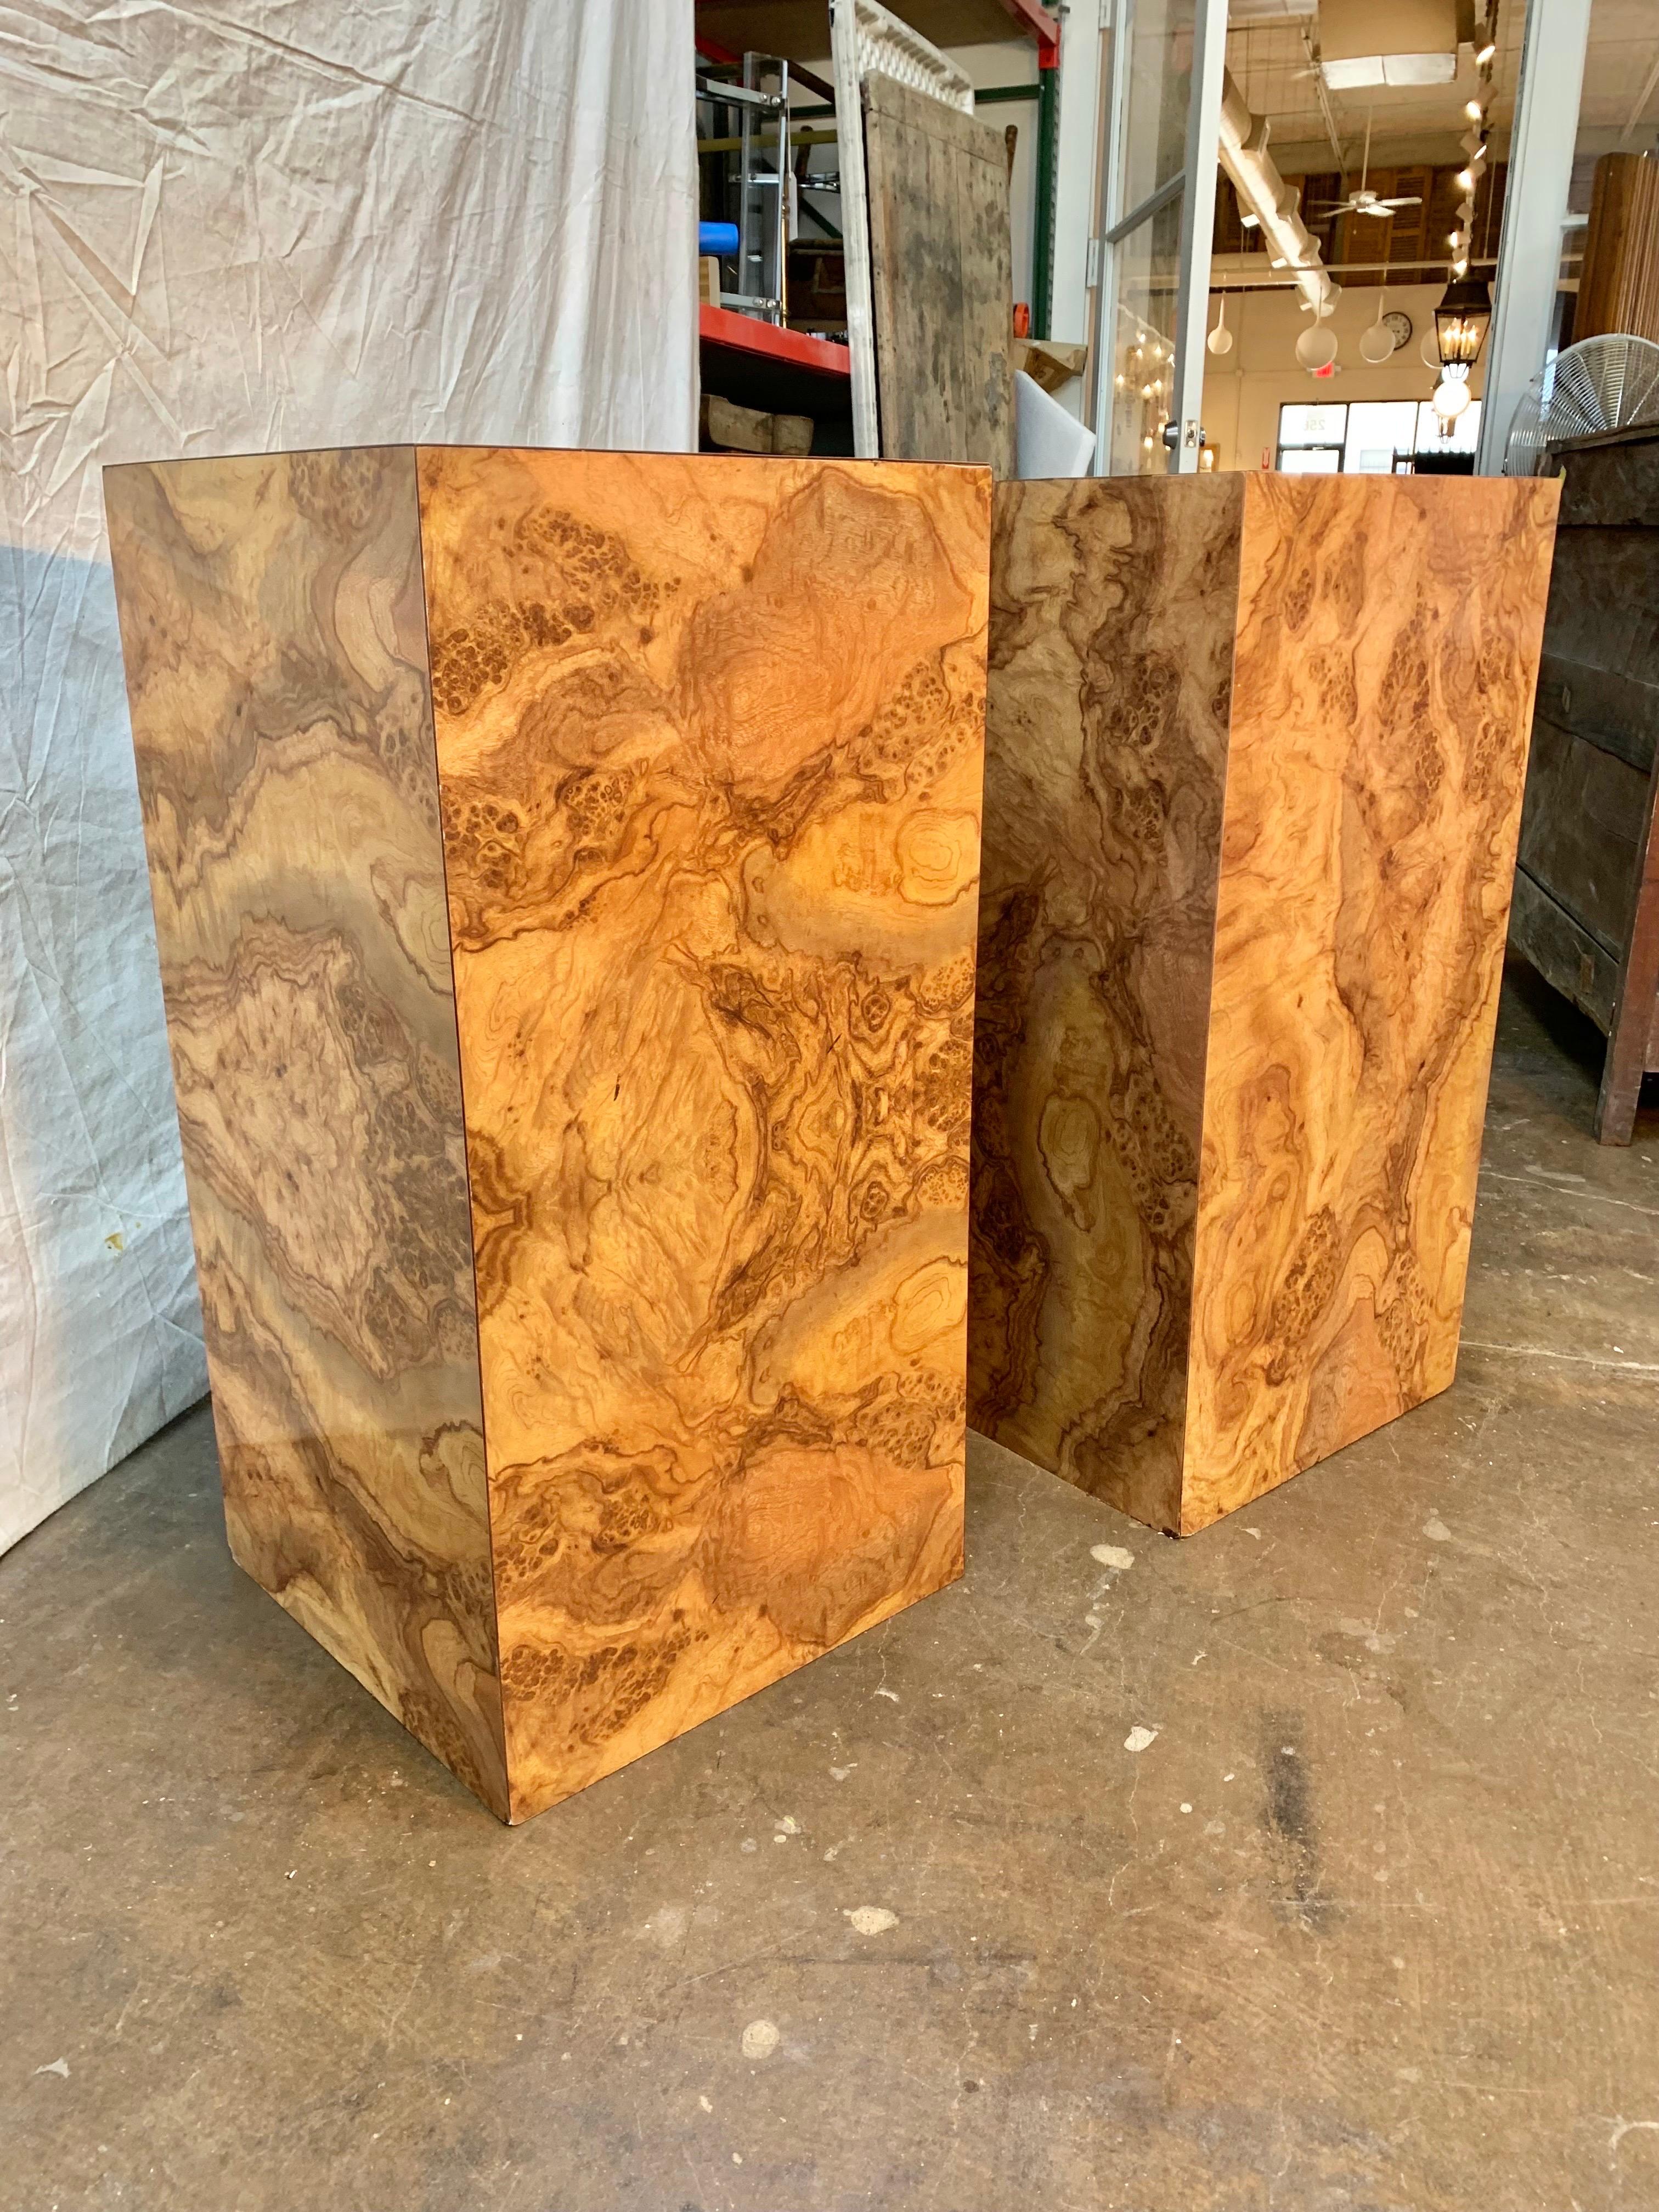 This pair of Mid Century Modern Burlwood Pedestals were crafted in the 1970's in style of Milo Baughman. Each pedestal is constructed with a burlwood veneer that has been applied to a pressed wood substrate. A unique pair, these pedestals with thier